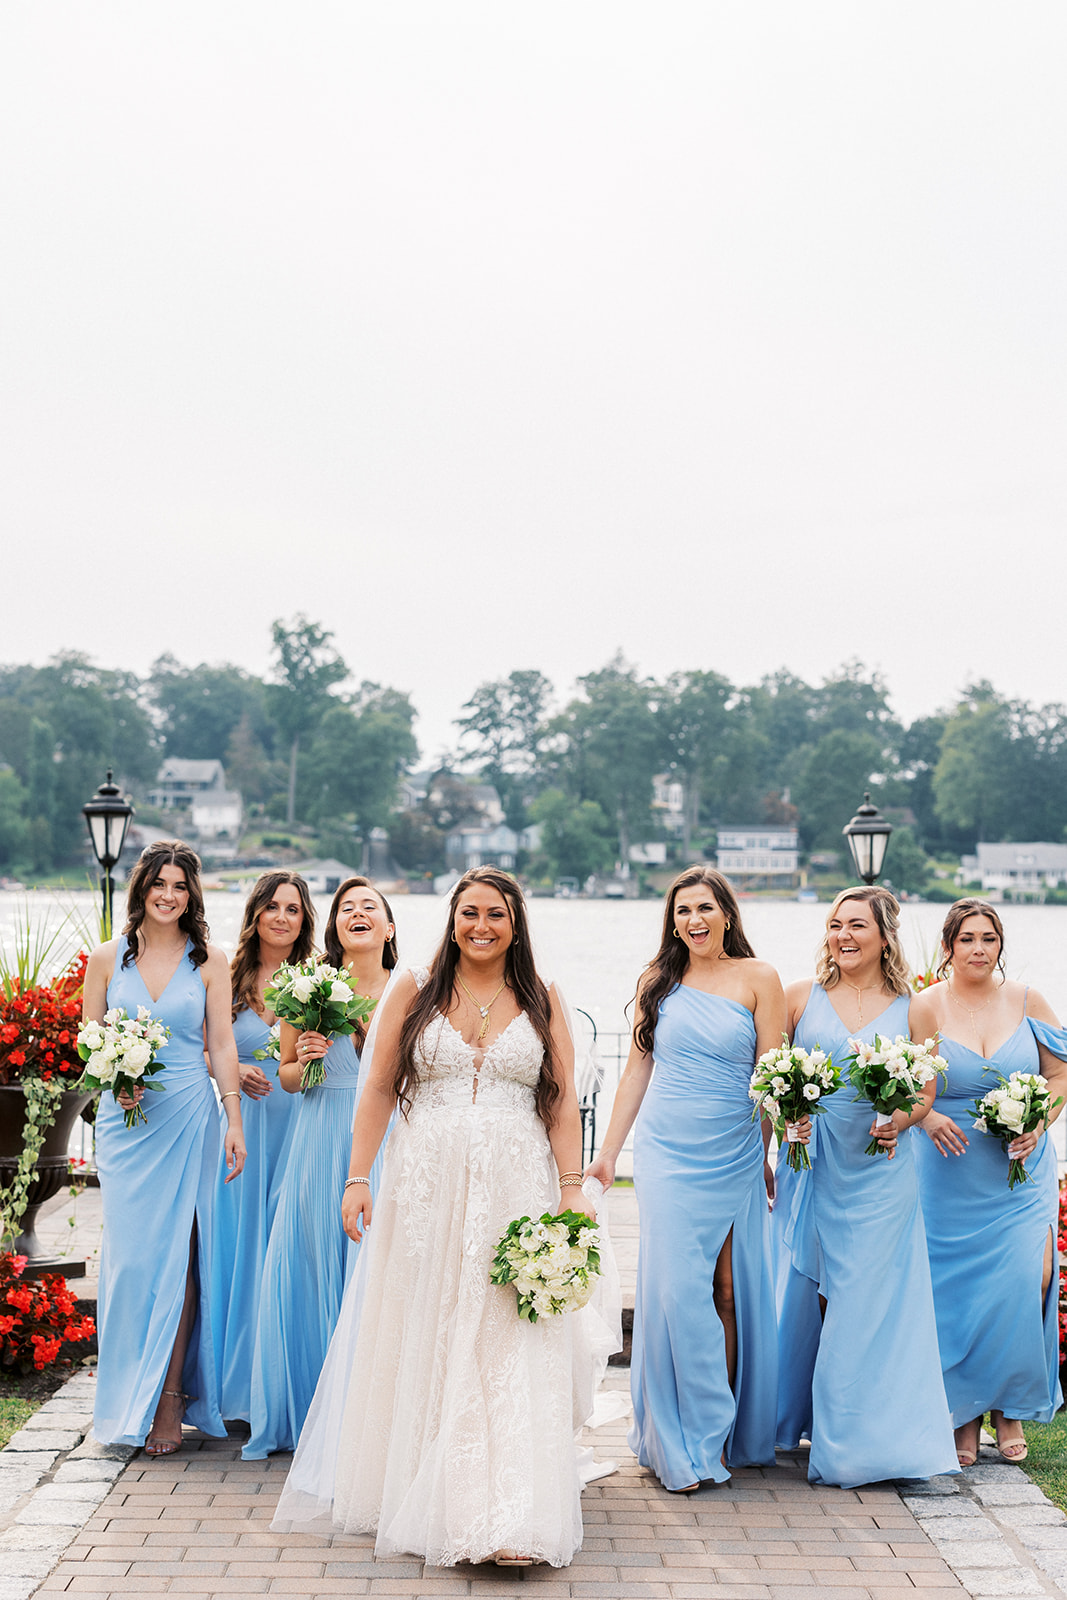 A bride walks up a brick paved path by the water with her bridal party in blue dresses behind her